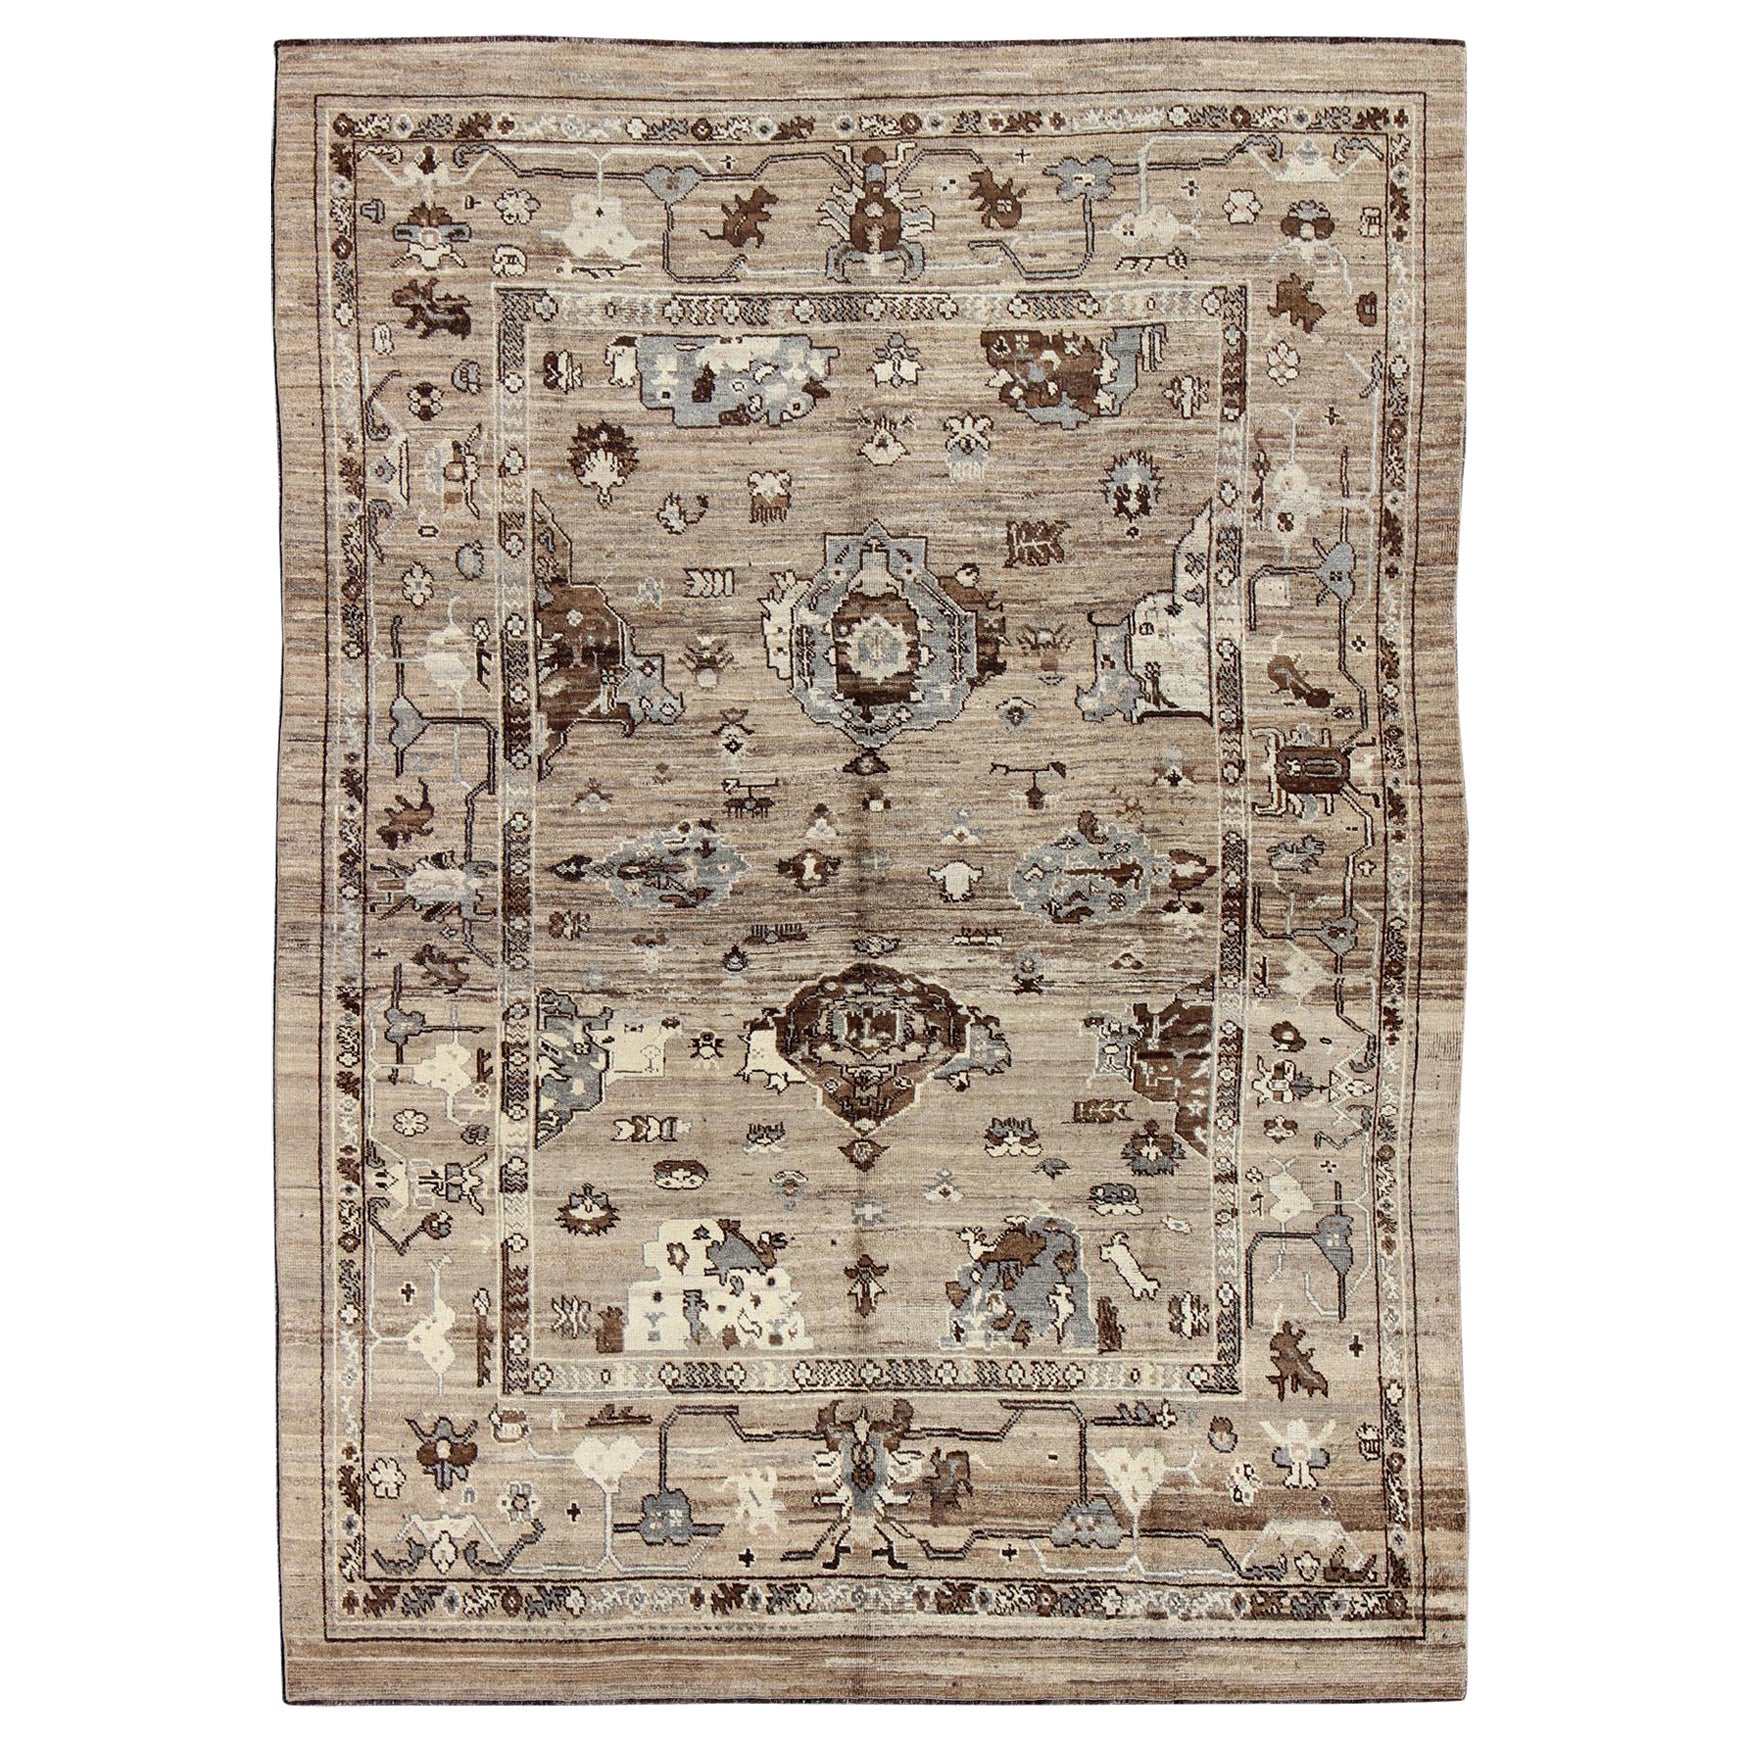 Turkish Oushak Rug in All-Over Design in Natural Wool Colors of Brown to Cream